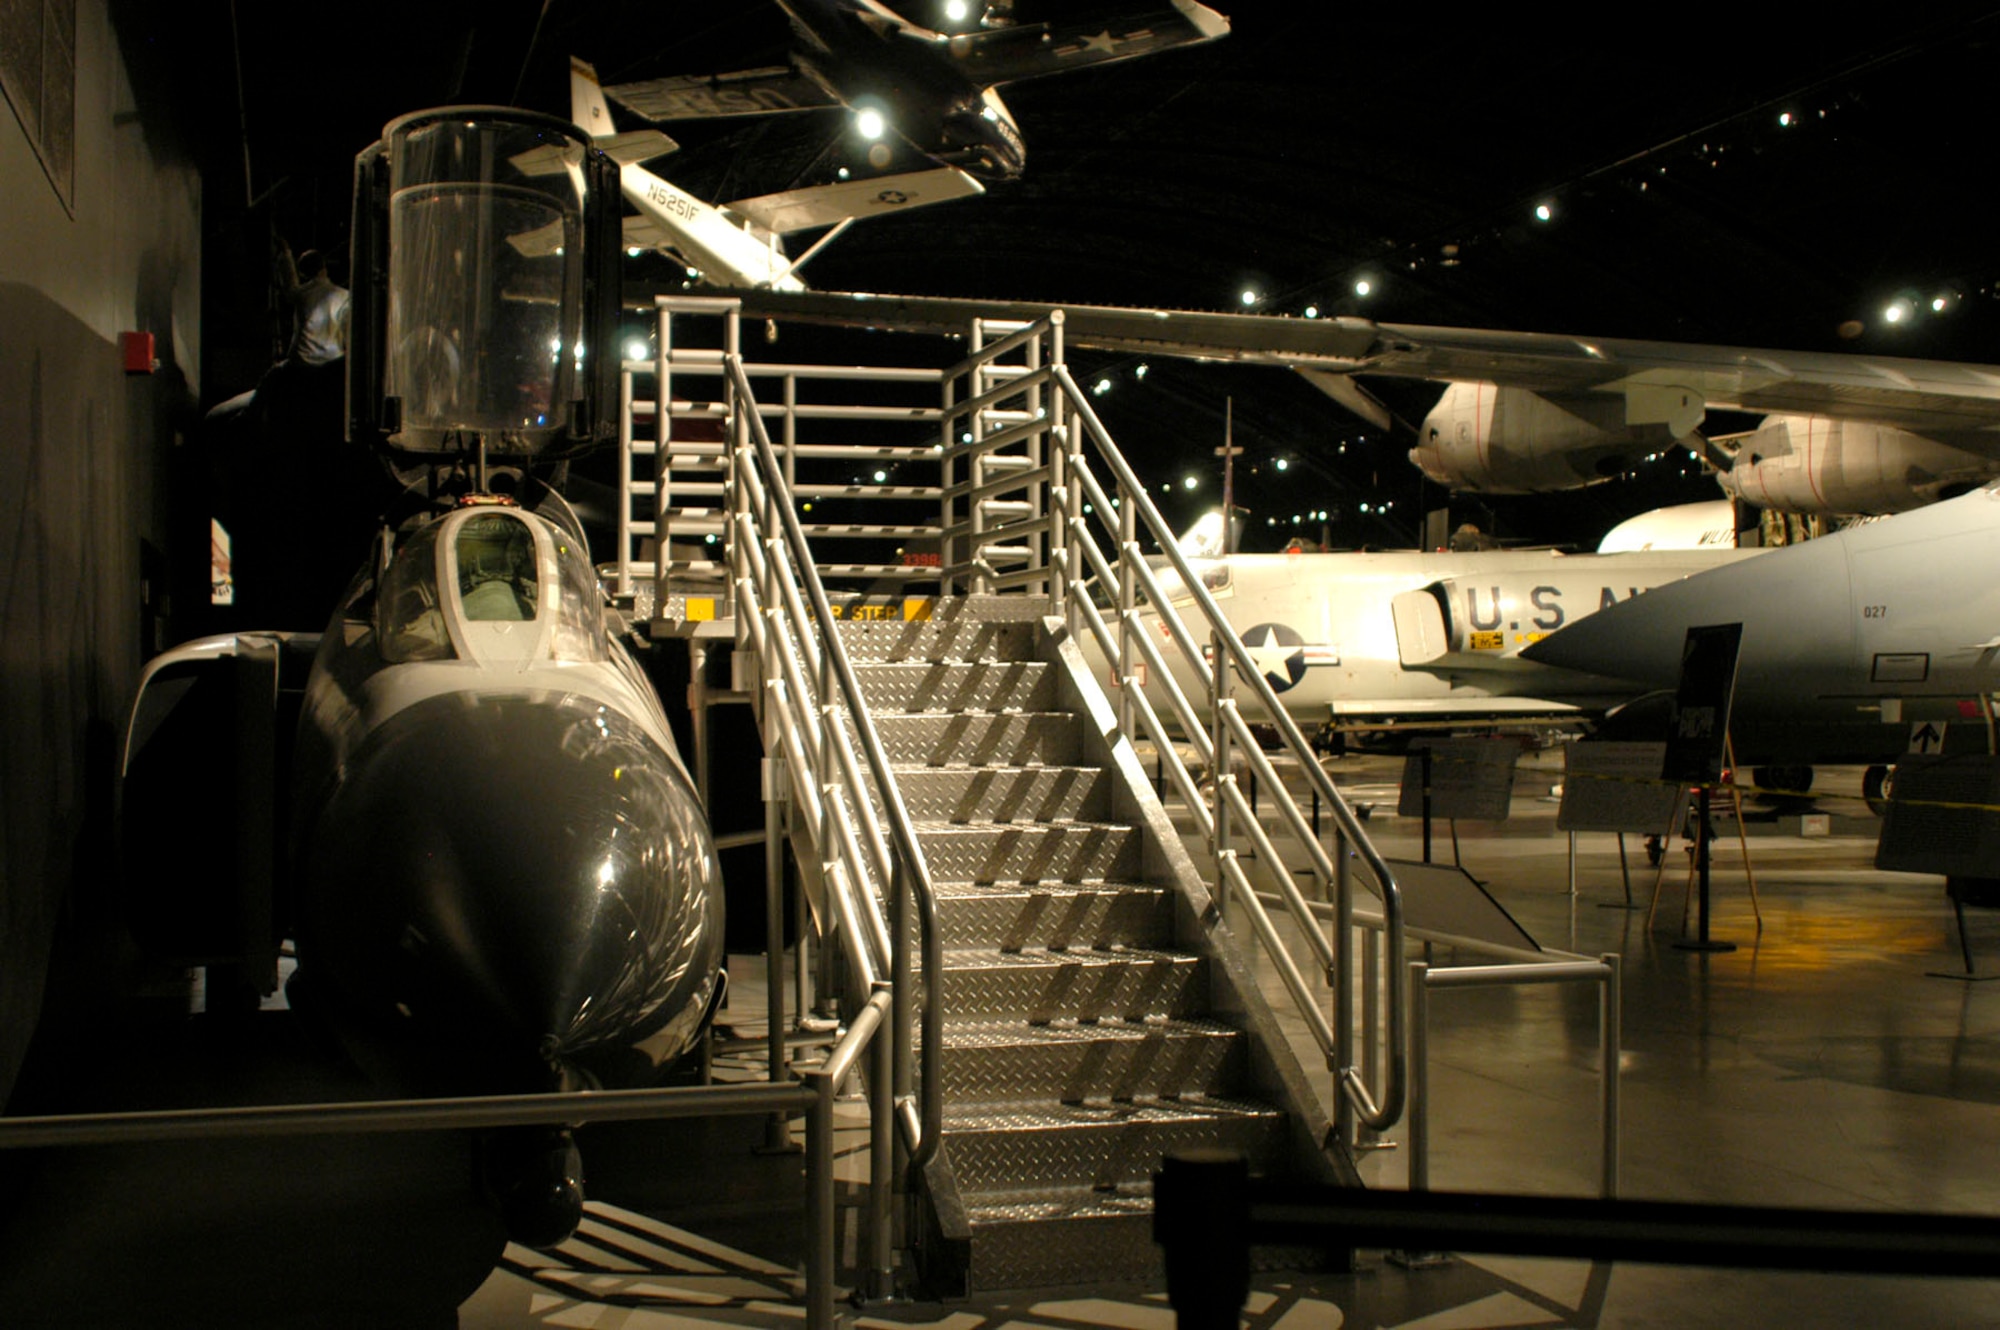 DAYTON, Ohio - F-4D Phantom II Sit-in Cockpit in the Cold War Gallery at the National Museum of the U.S. Air Force. (U.S. Air Force photo)